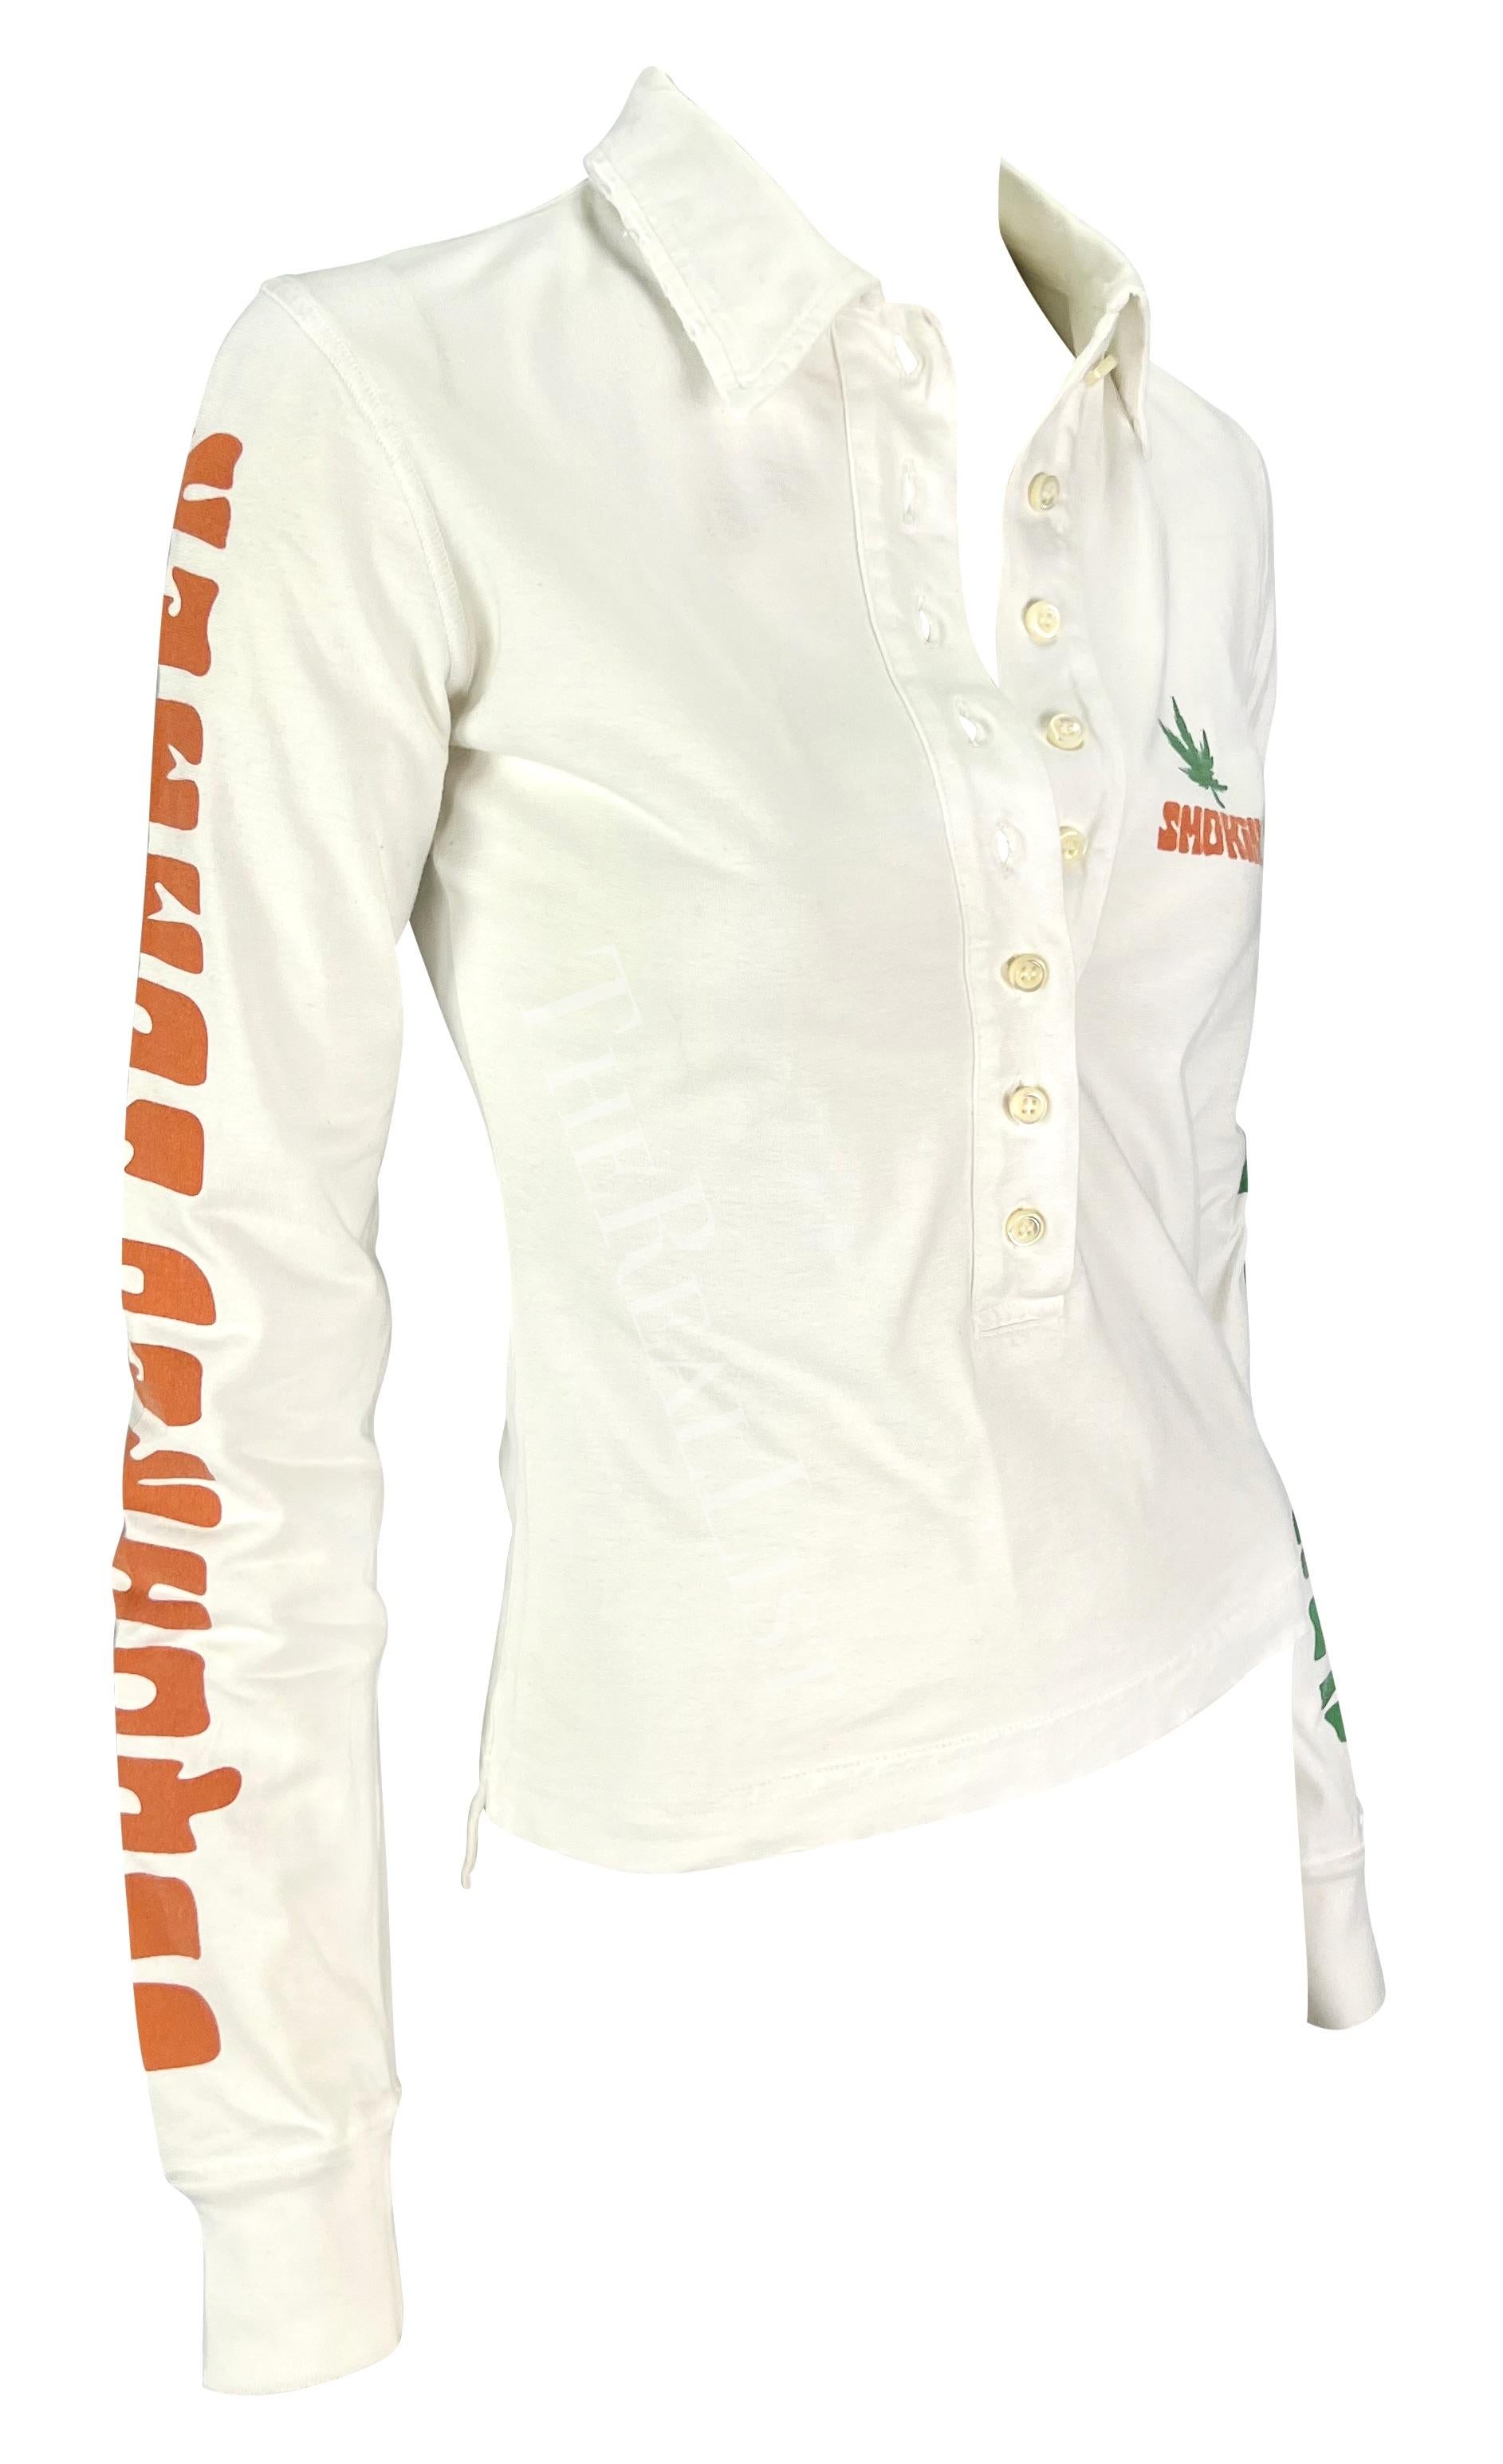 Women's S/S 2005 Dsquared2  'Stoner' Marijuana Smoking White Distressed Rugby Polo Top  For Sale